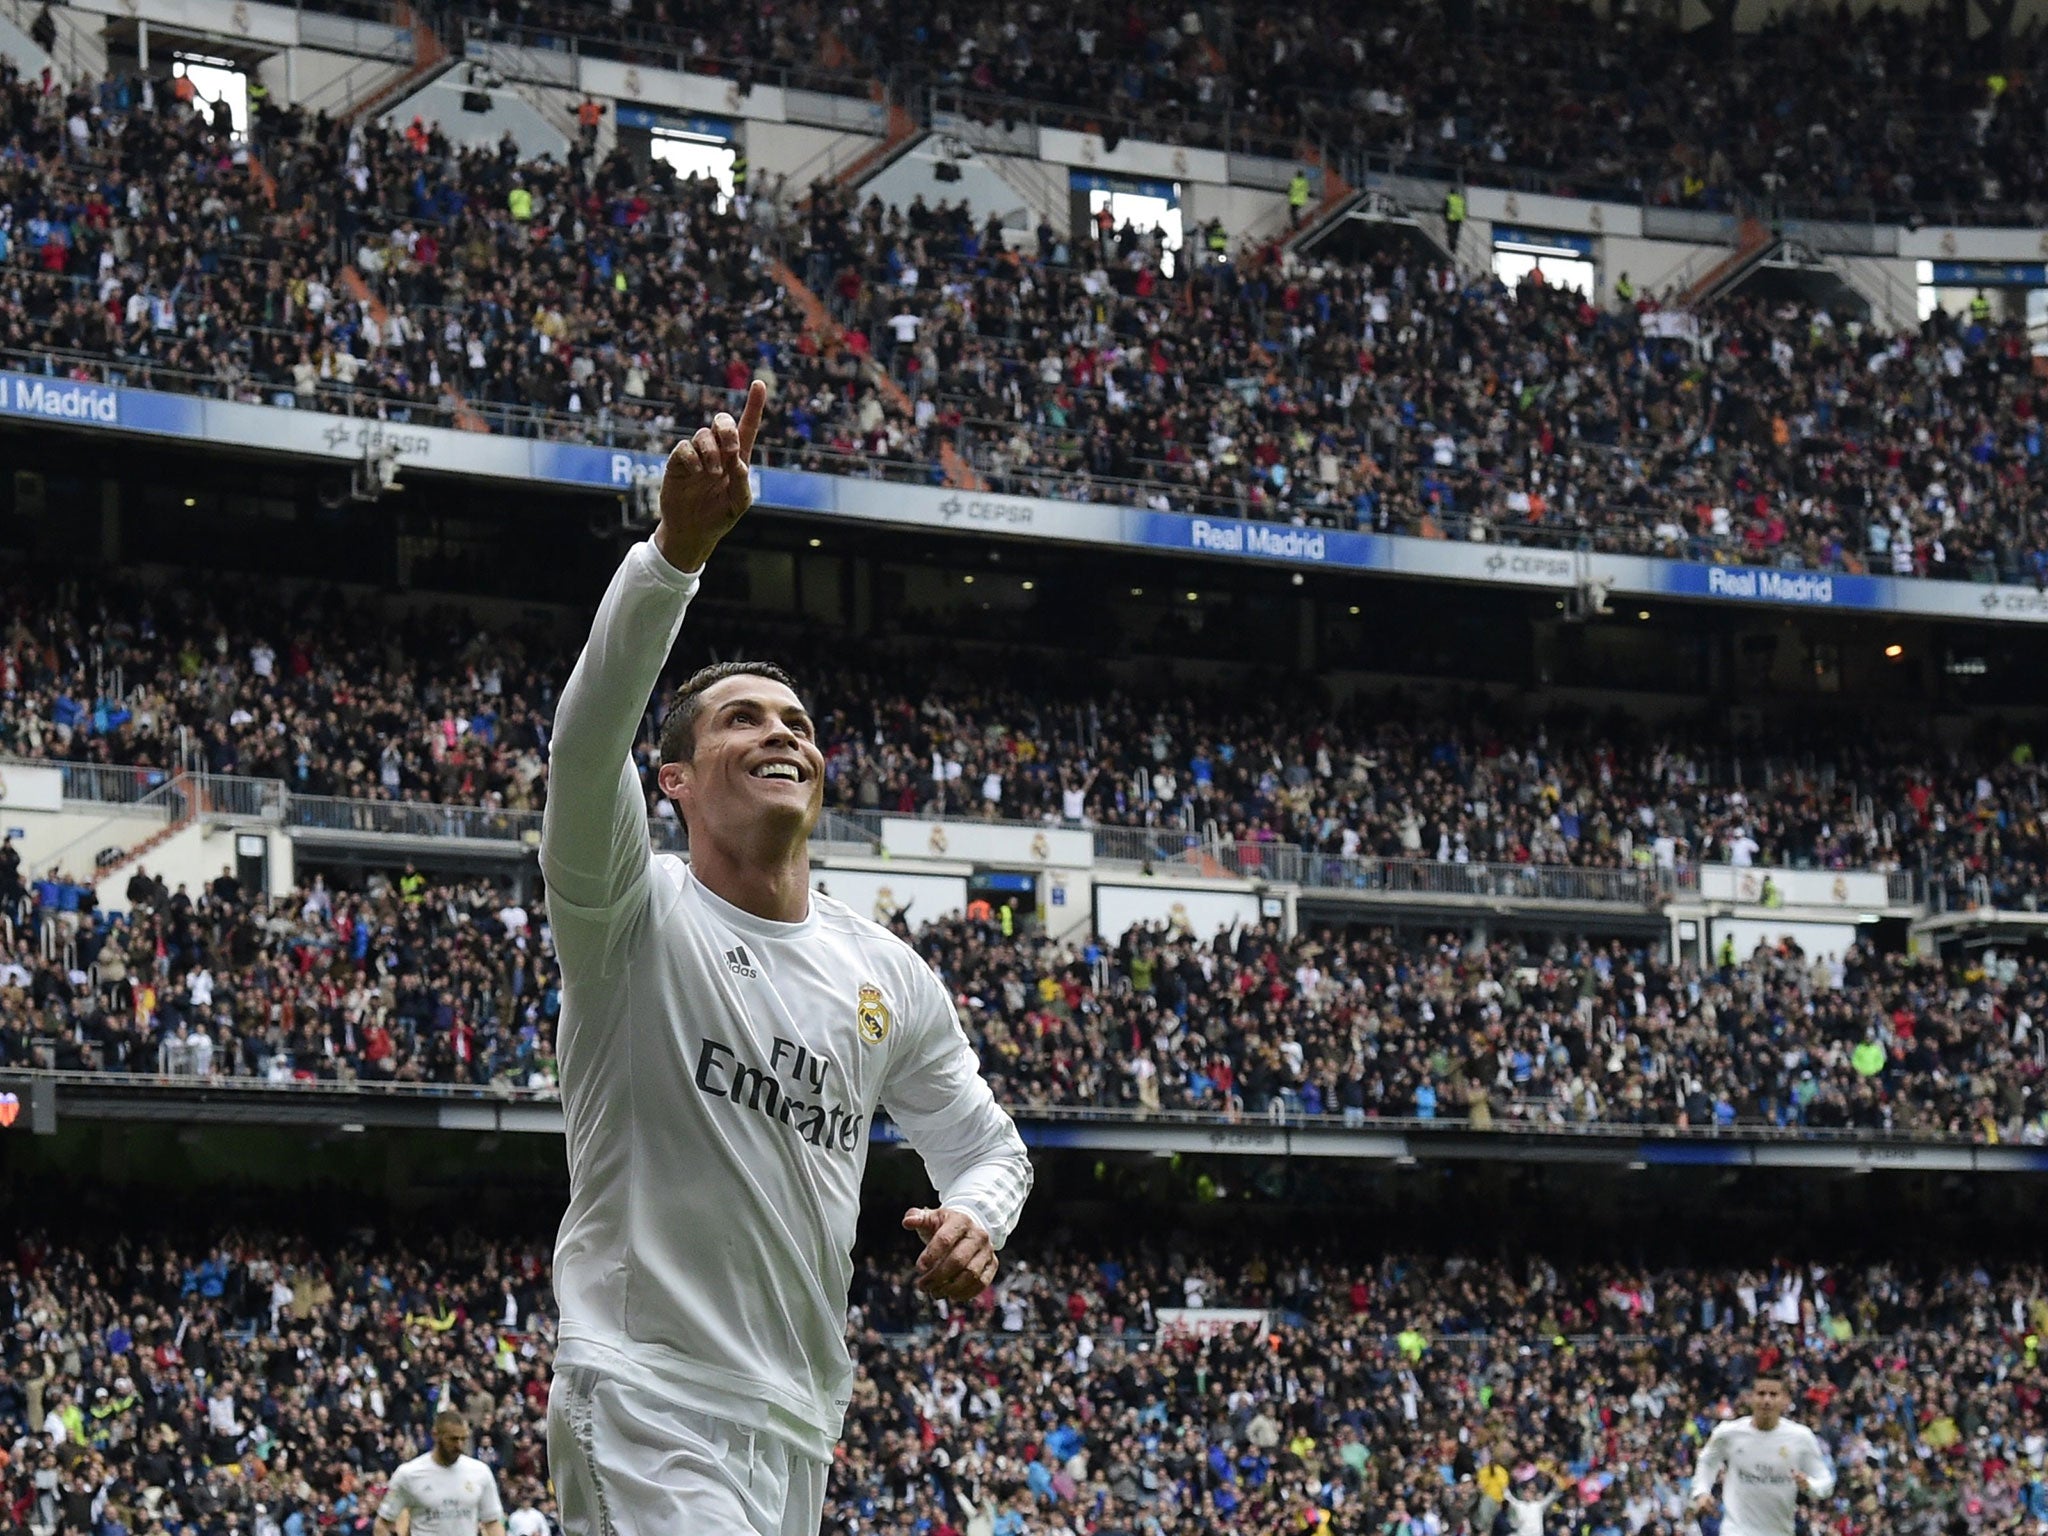 Ronaldo has been once again crowned the winner of the Ballon d'Or